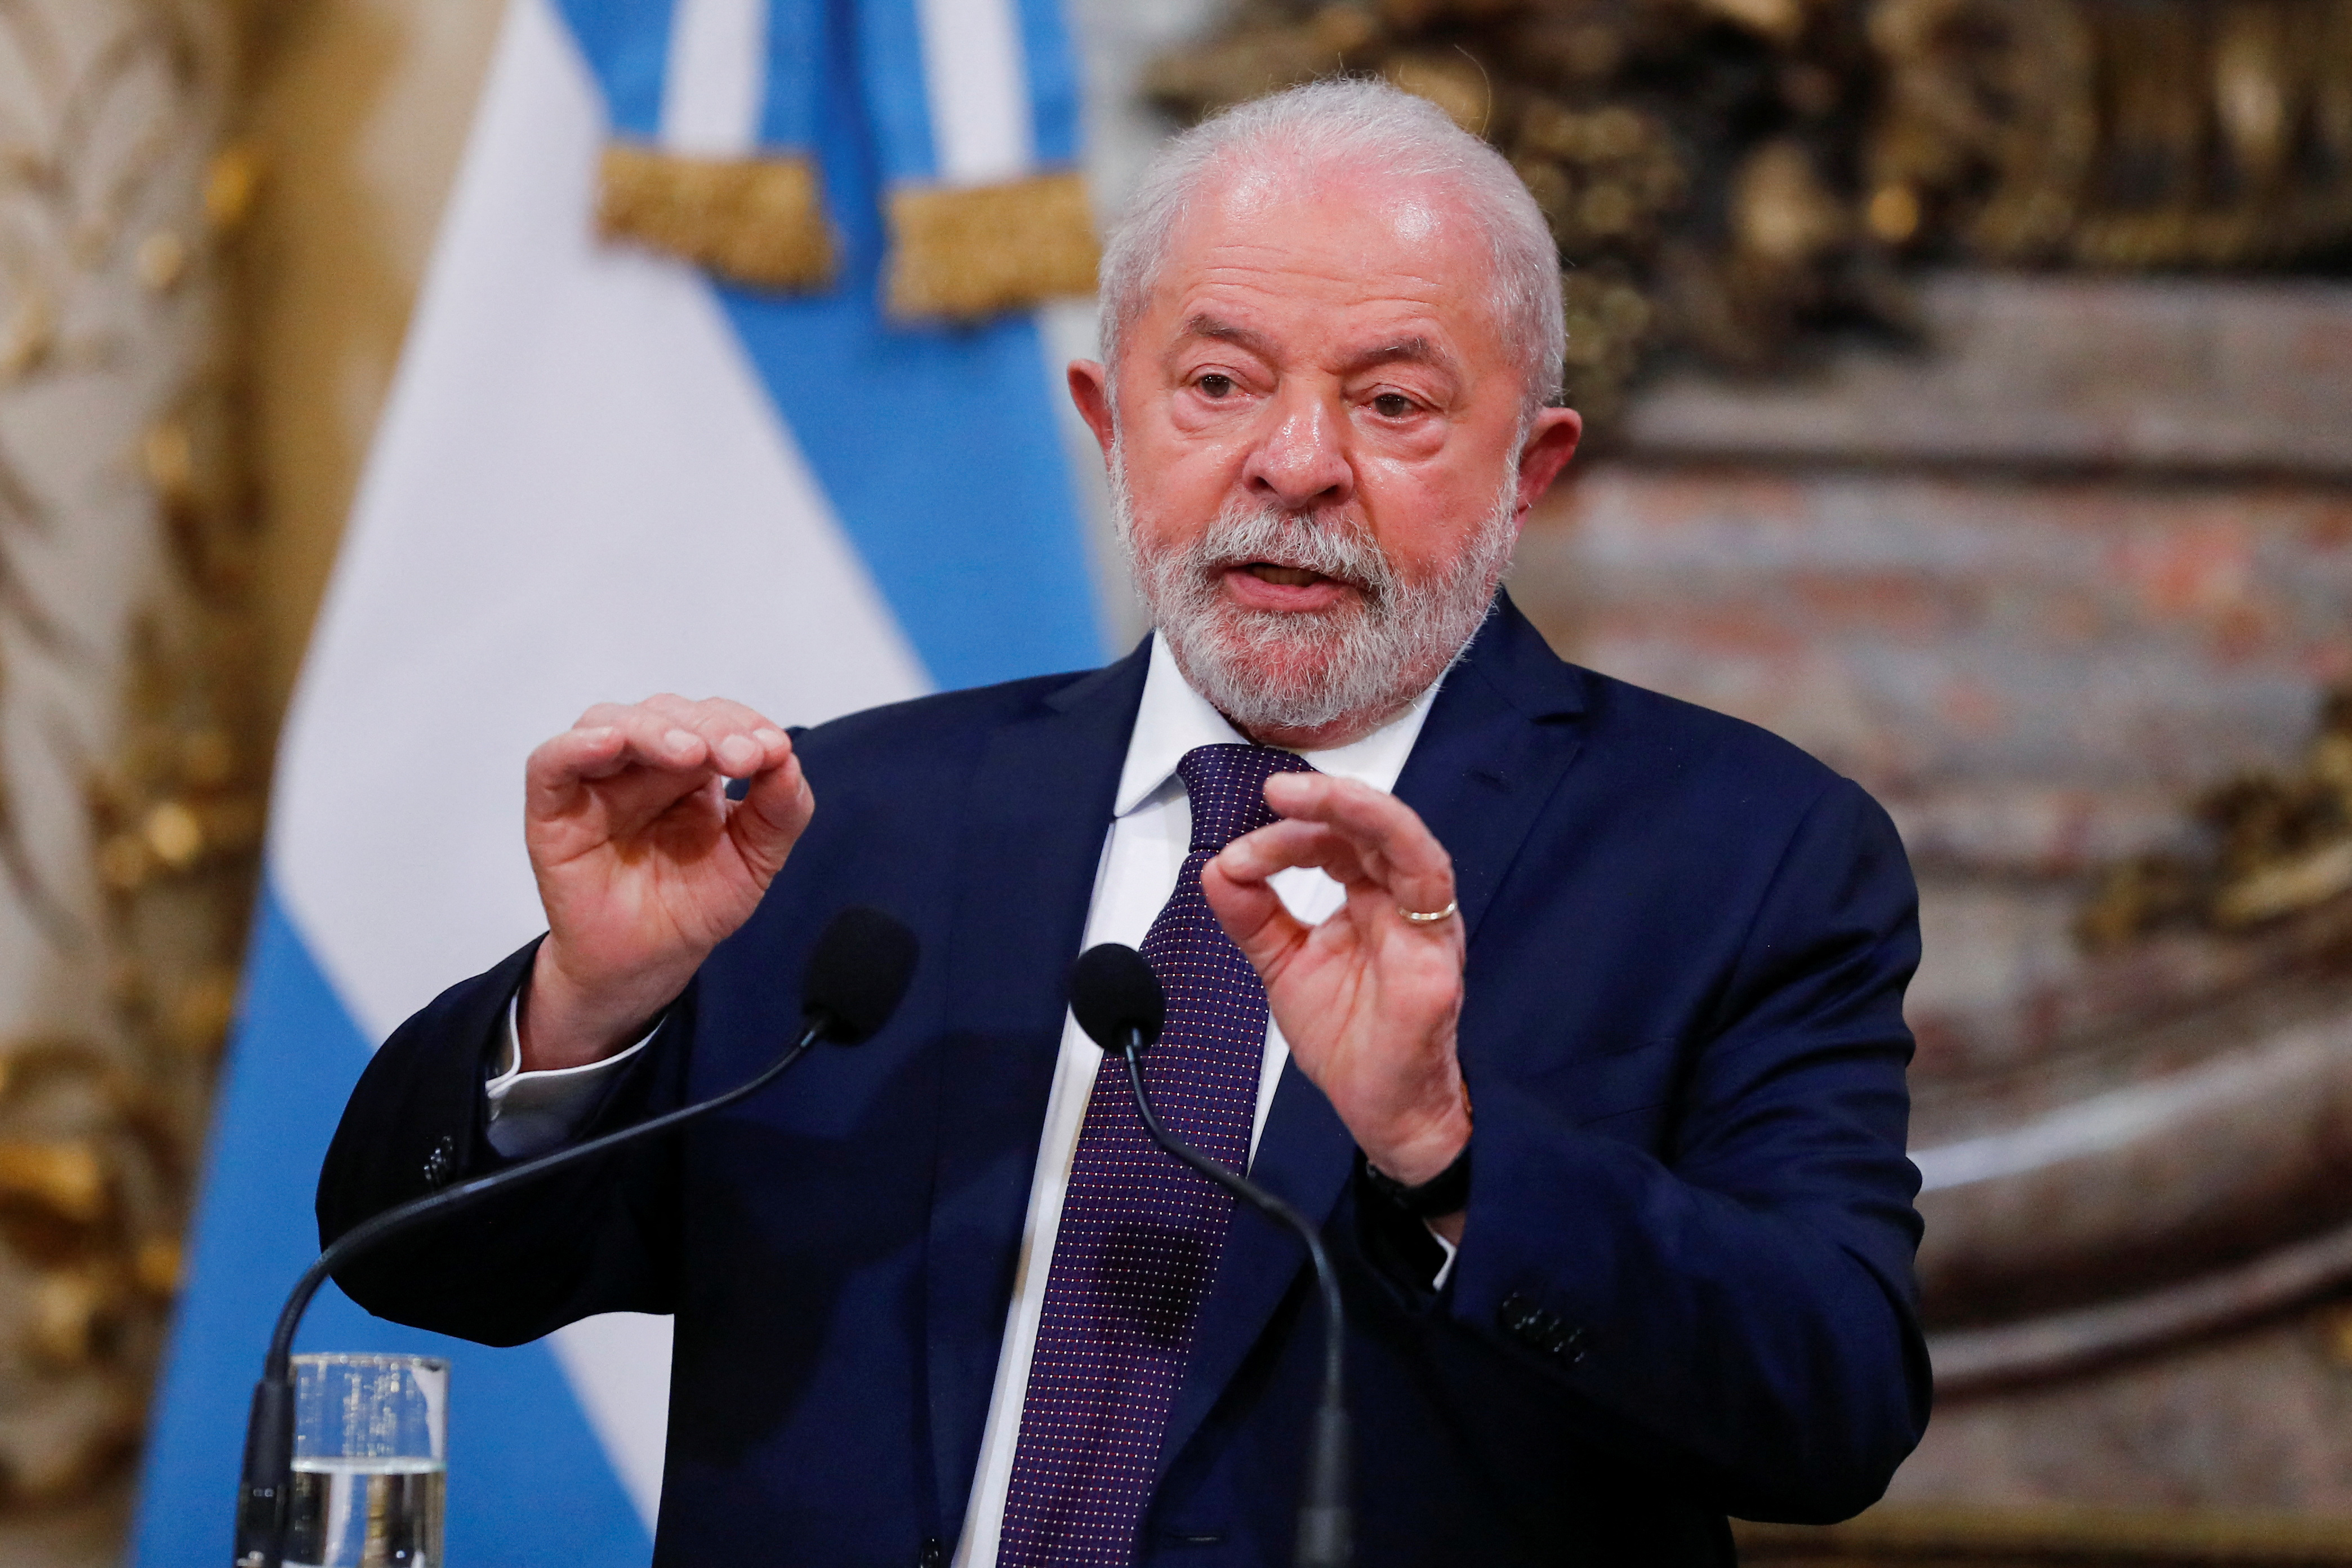 Brazil's President Luiz Inacio Lula da Silva gestures, at a bilateral agreement signing ceremony with Argentina's President Alberto Fernandez (not pictured), during?Lula da Silva?s?first official visit abroad since his inauguration, at the Casa Rosada presidential palace in Buenos Aires, Argentina, January 23, 2023. REUTERS/Agustin Marcarian